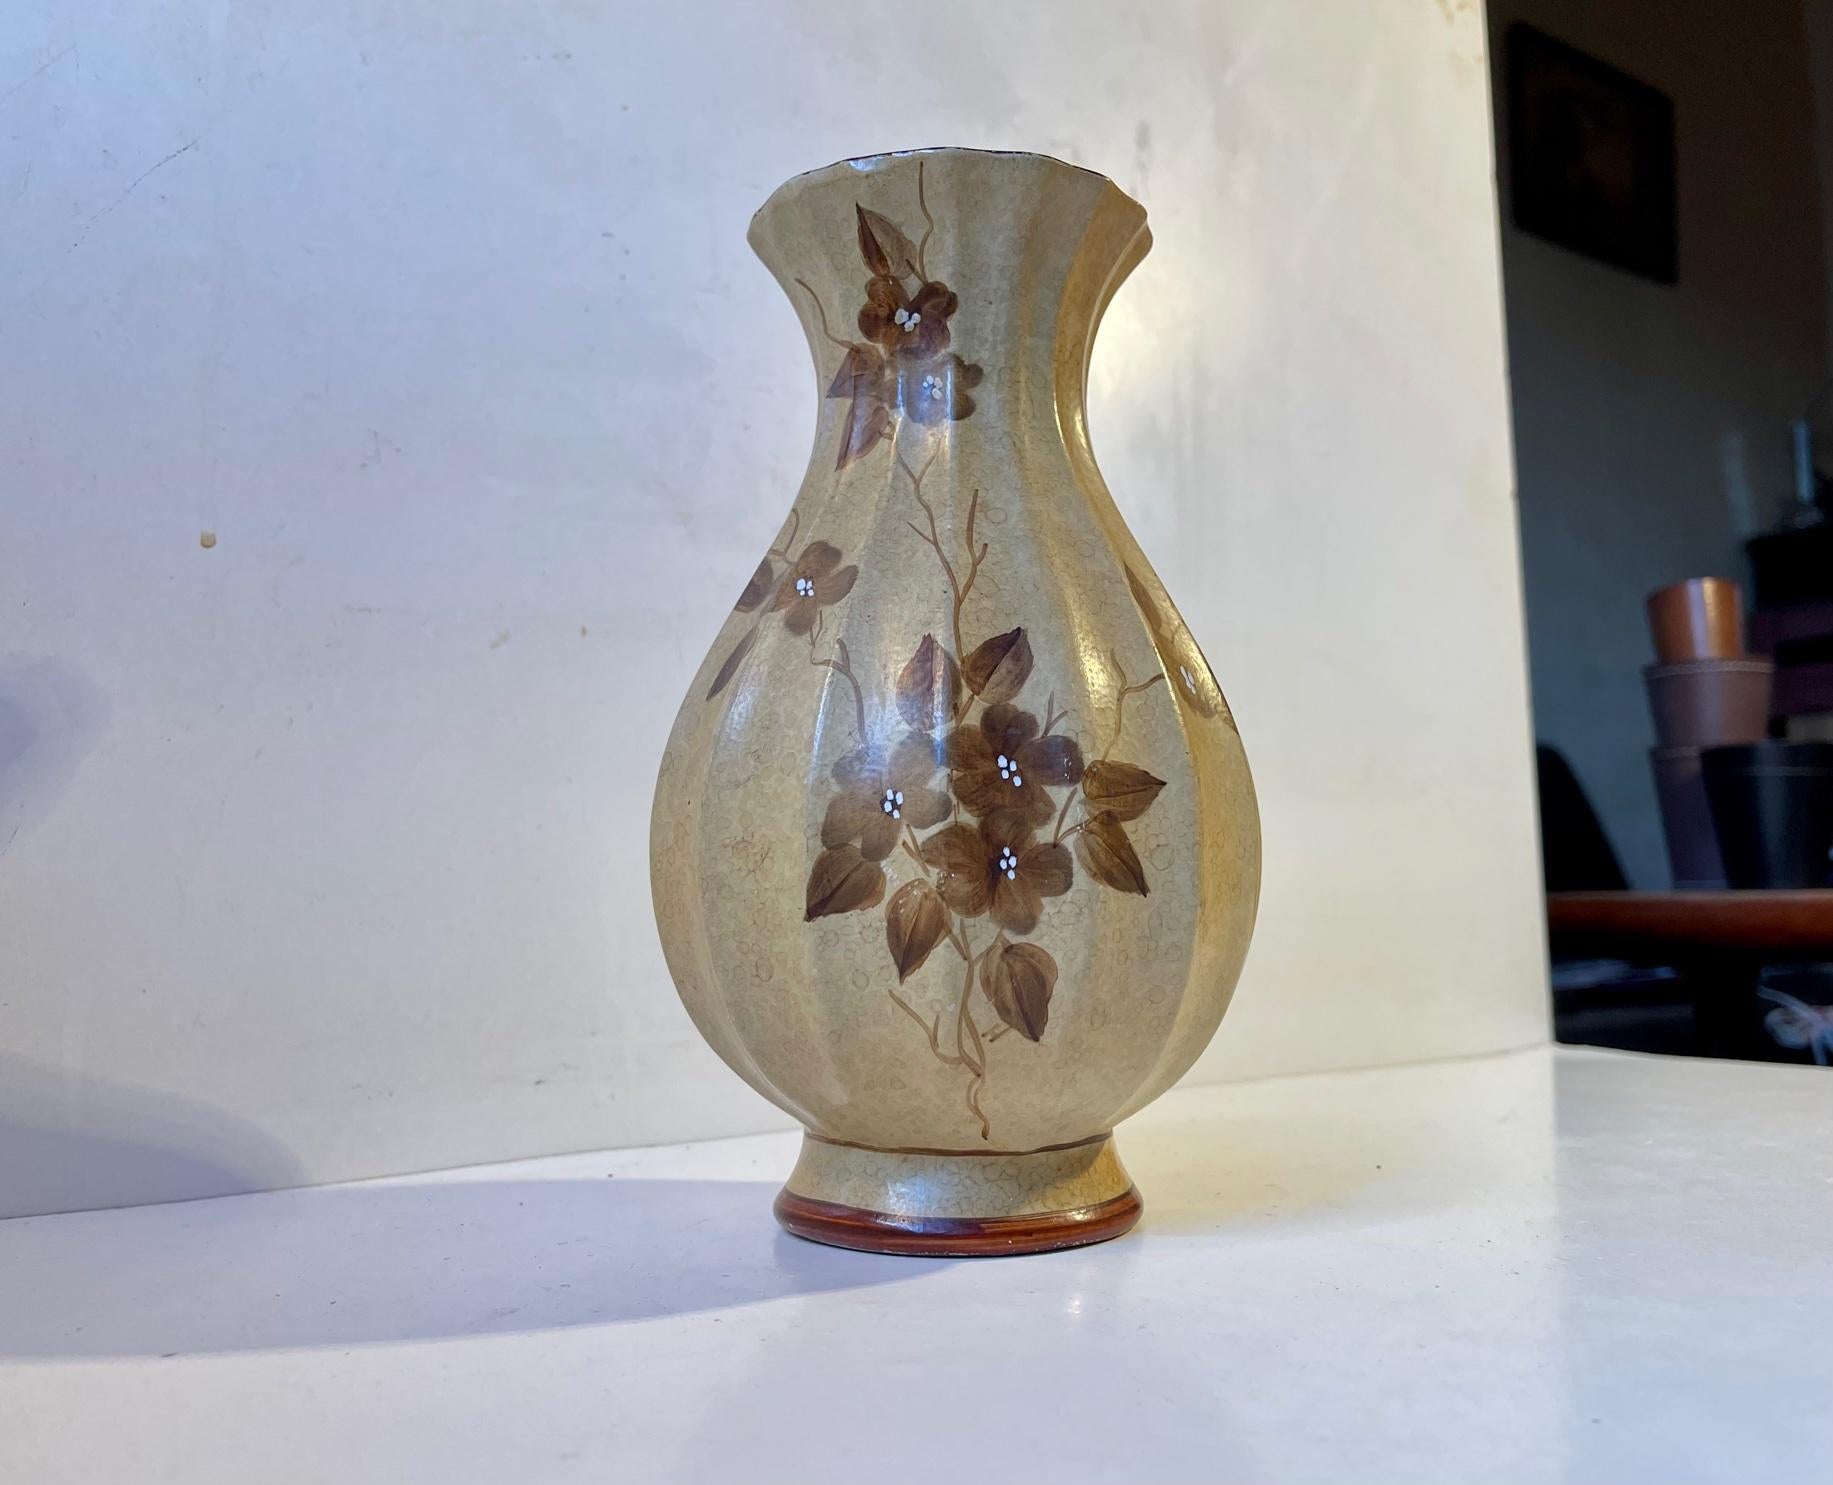 A classic Art Deco shape vase fully glazed in earthy tones and decorated with handprinted flowers. Designed and manufactured by Knabstrup in Denmark during the 1920s or 1930s. Measurements: H: 22 cm, D: 12 cm at the center.